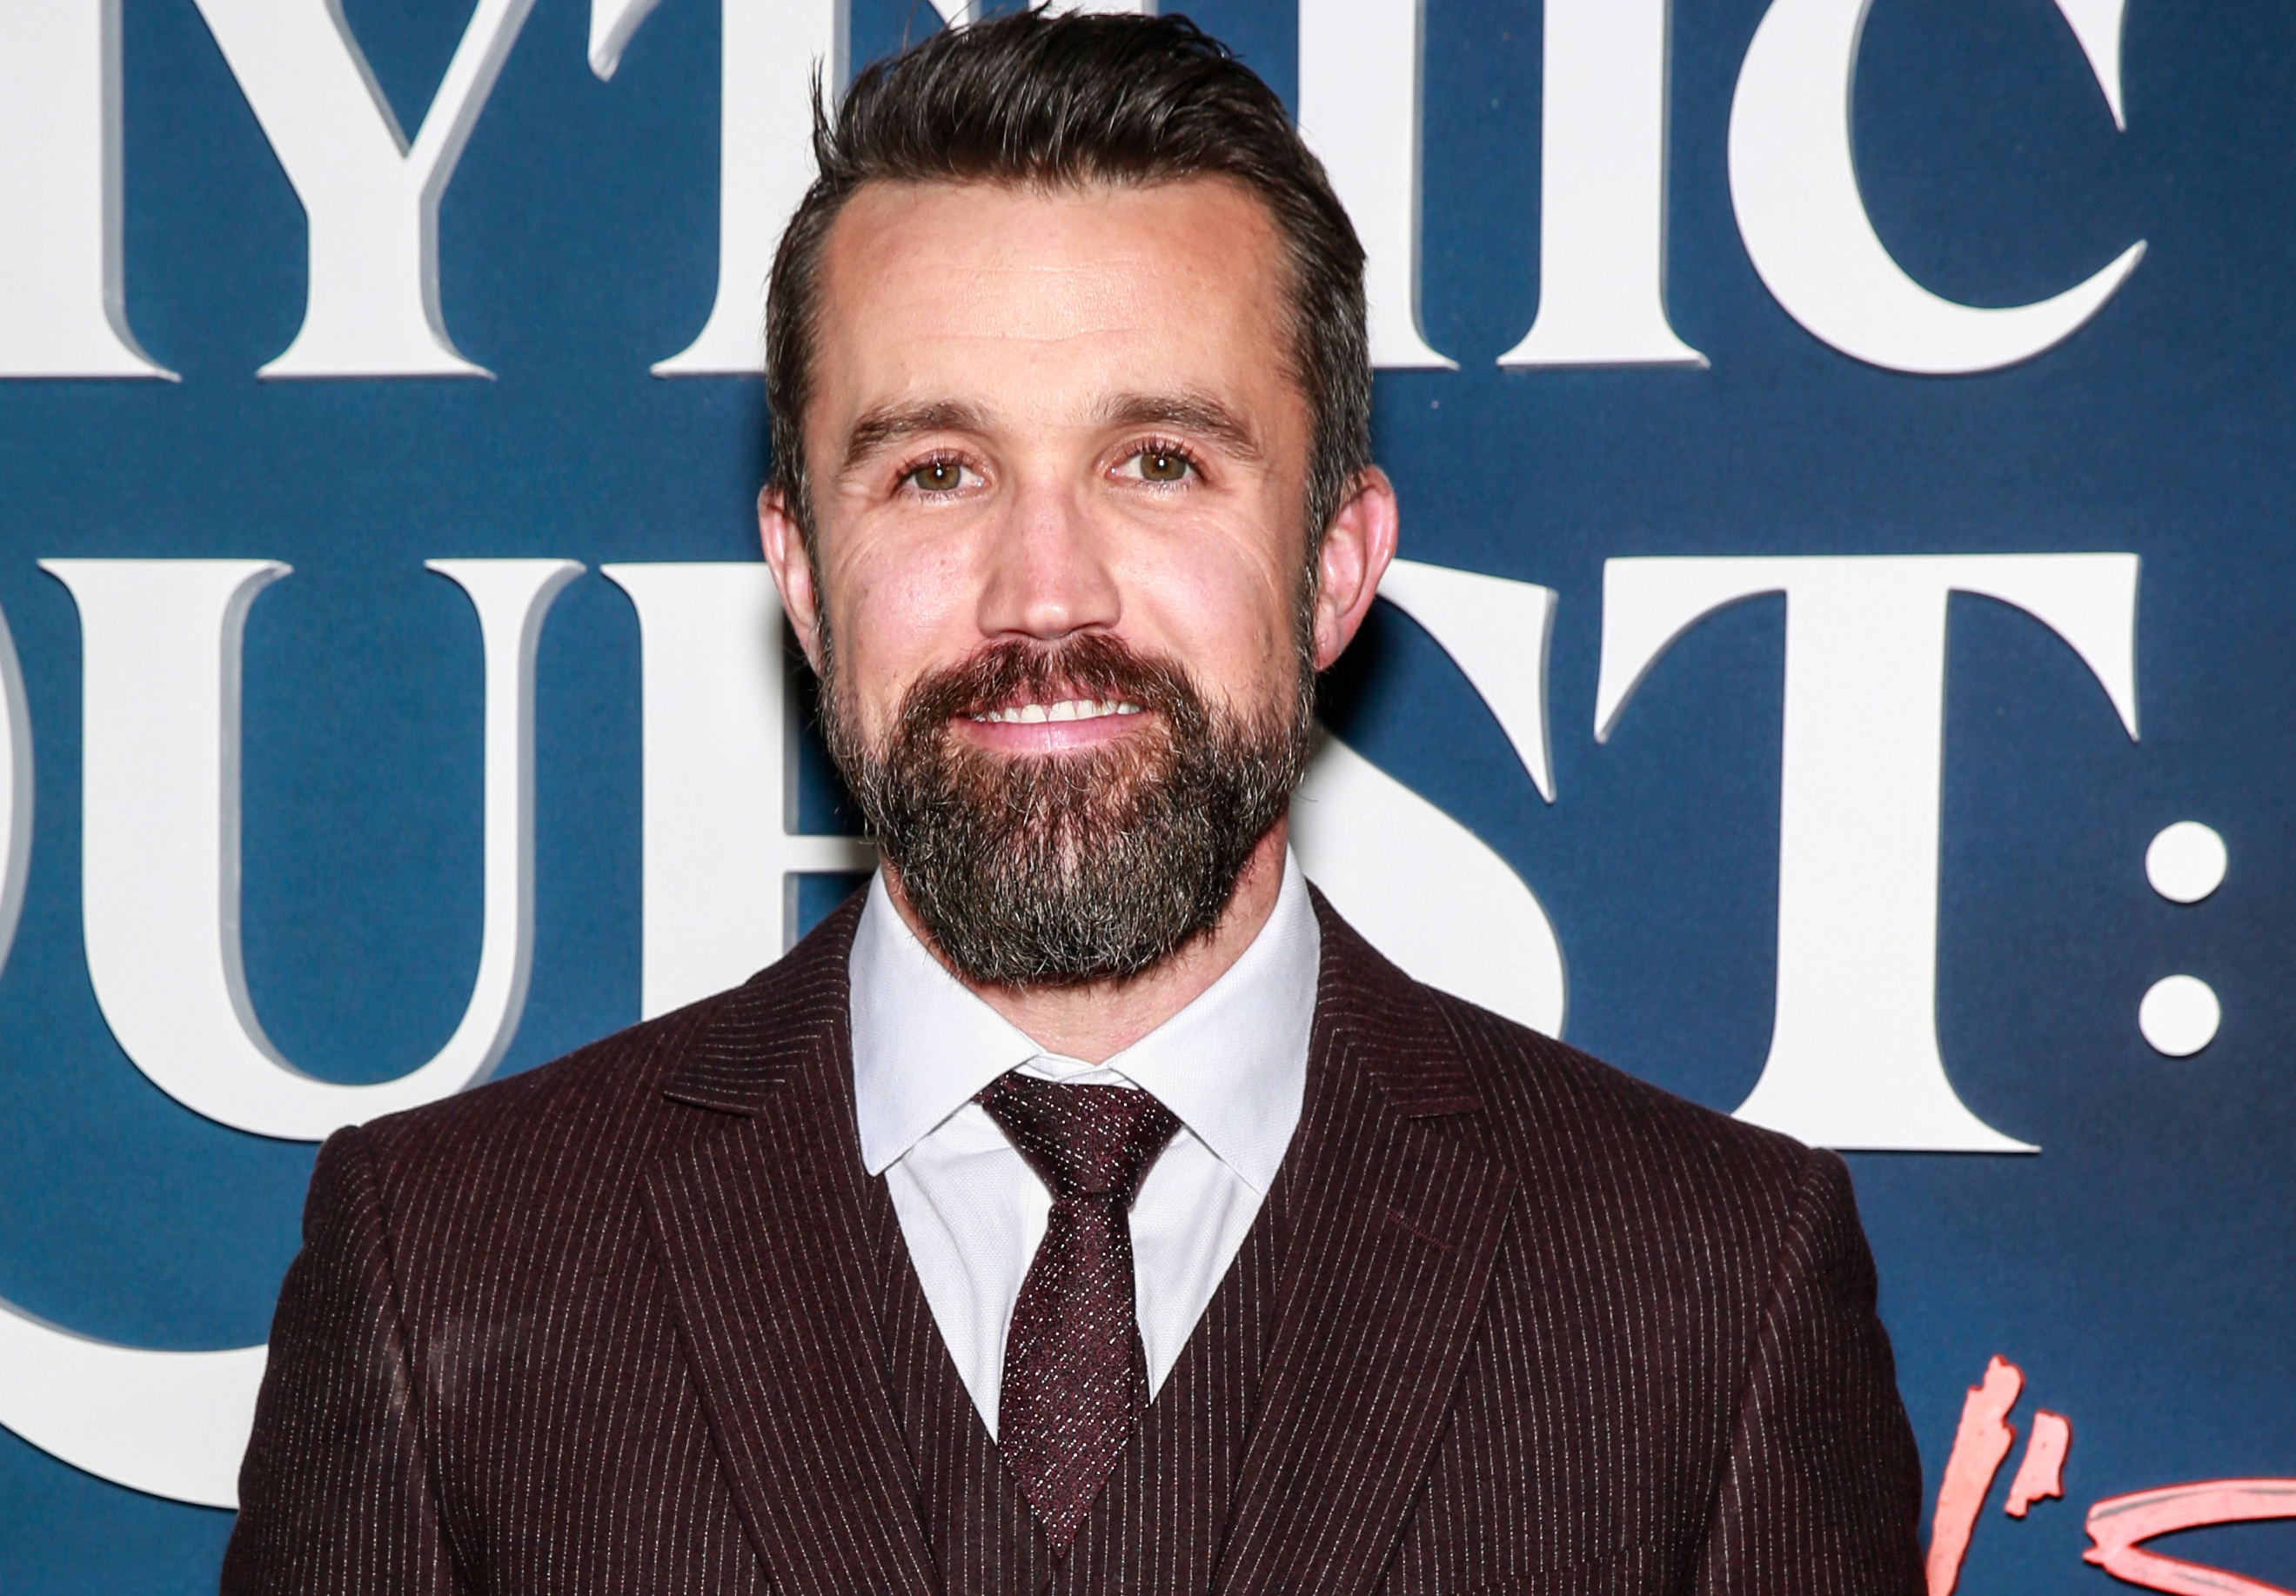 Rob McElhenney Advises TV Creators to ‘Make What You Want to See’